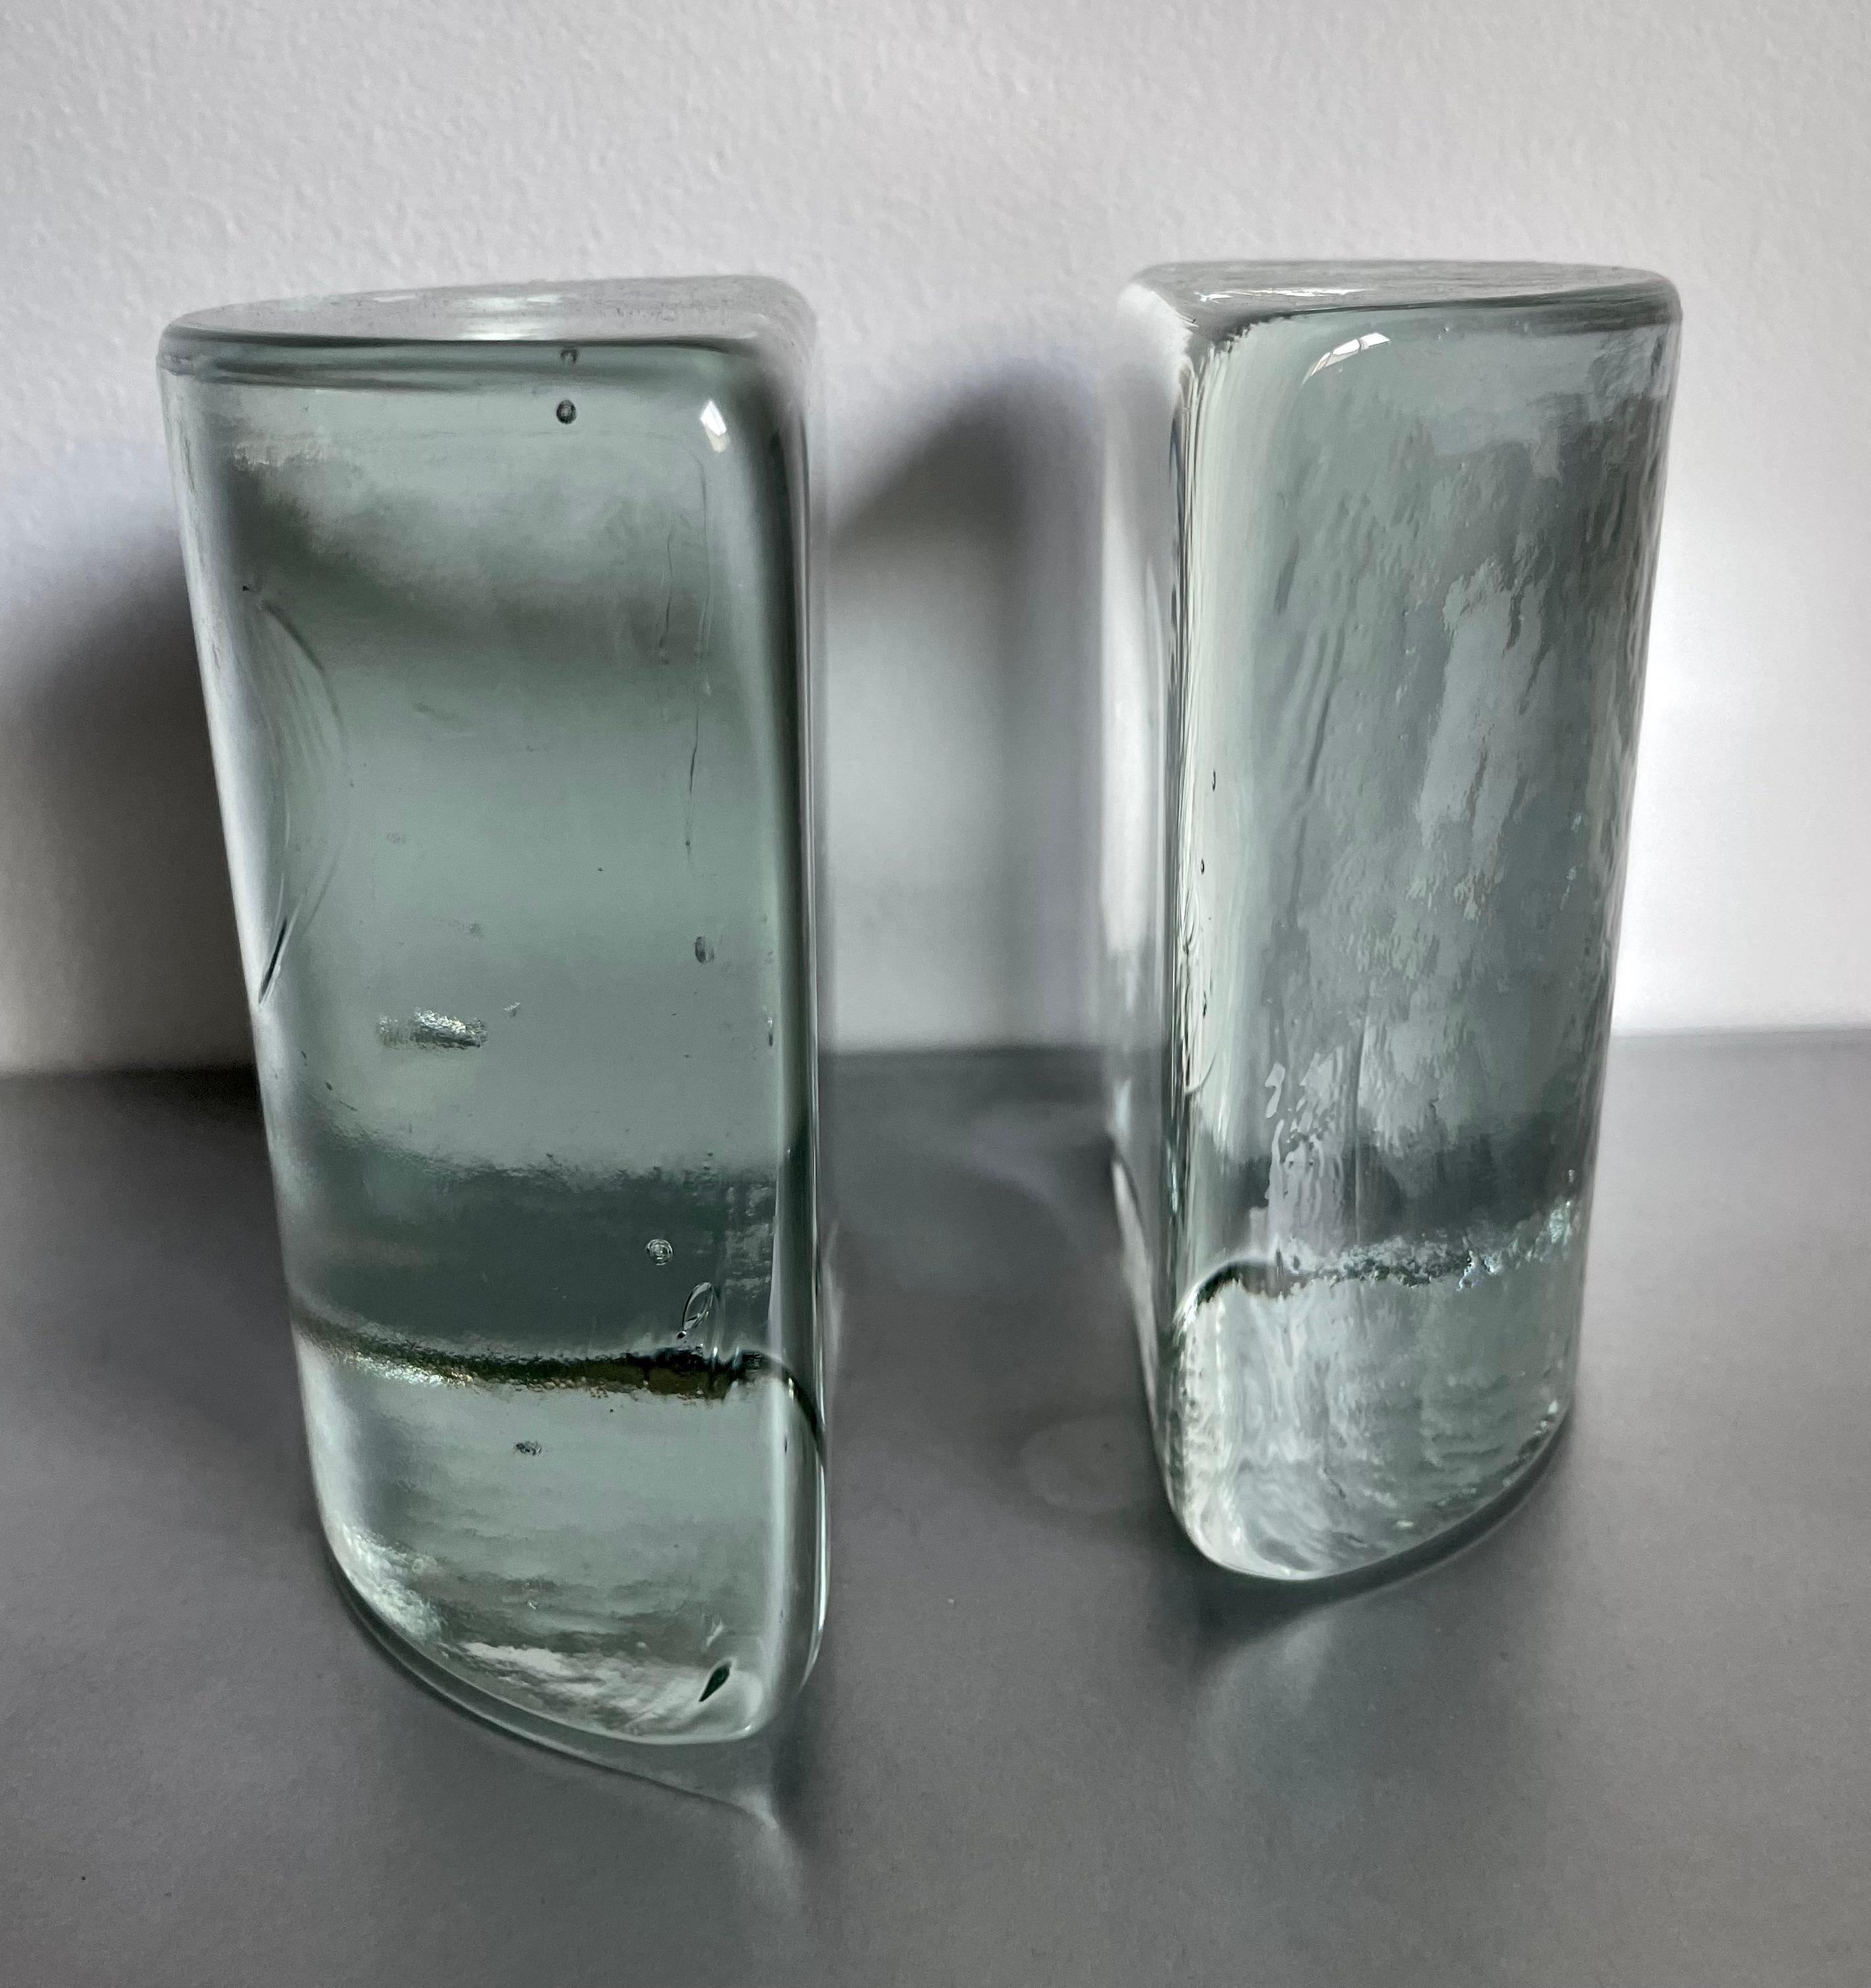 Blenko glass Half Circle bookends by Wayne Husted, 1960s.

In great condition, no damage.